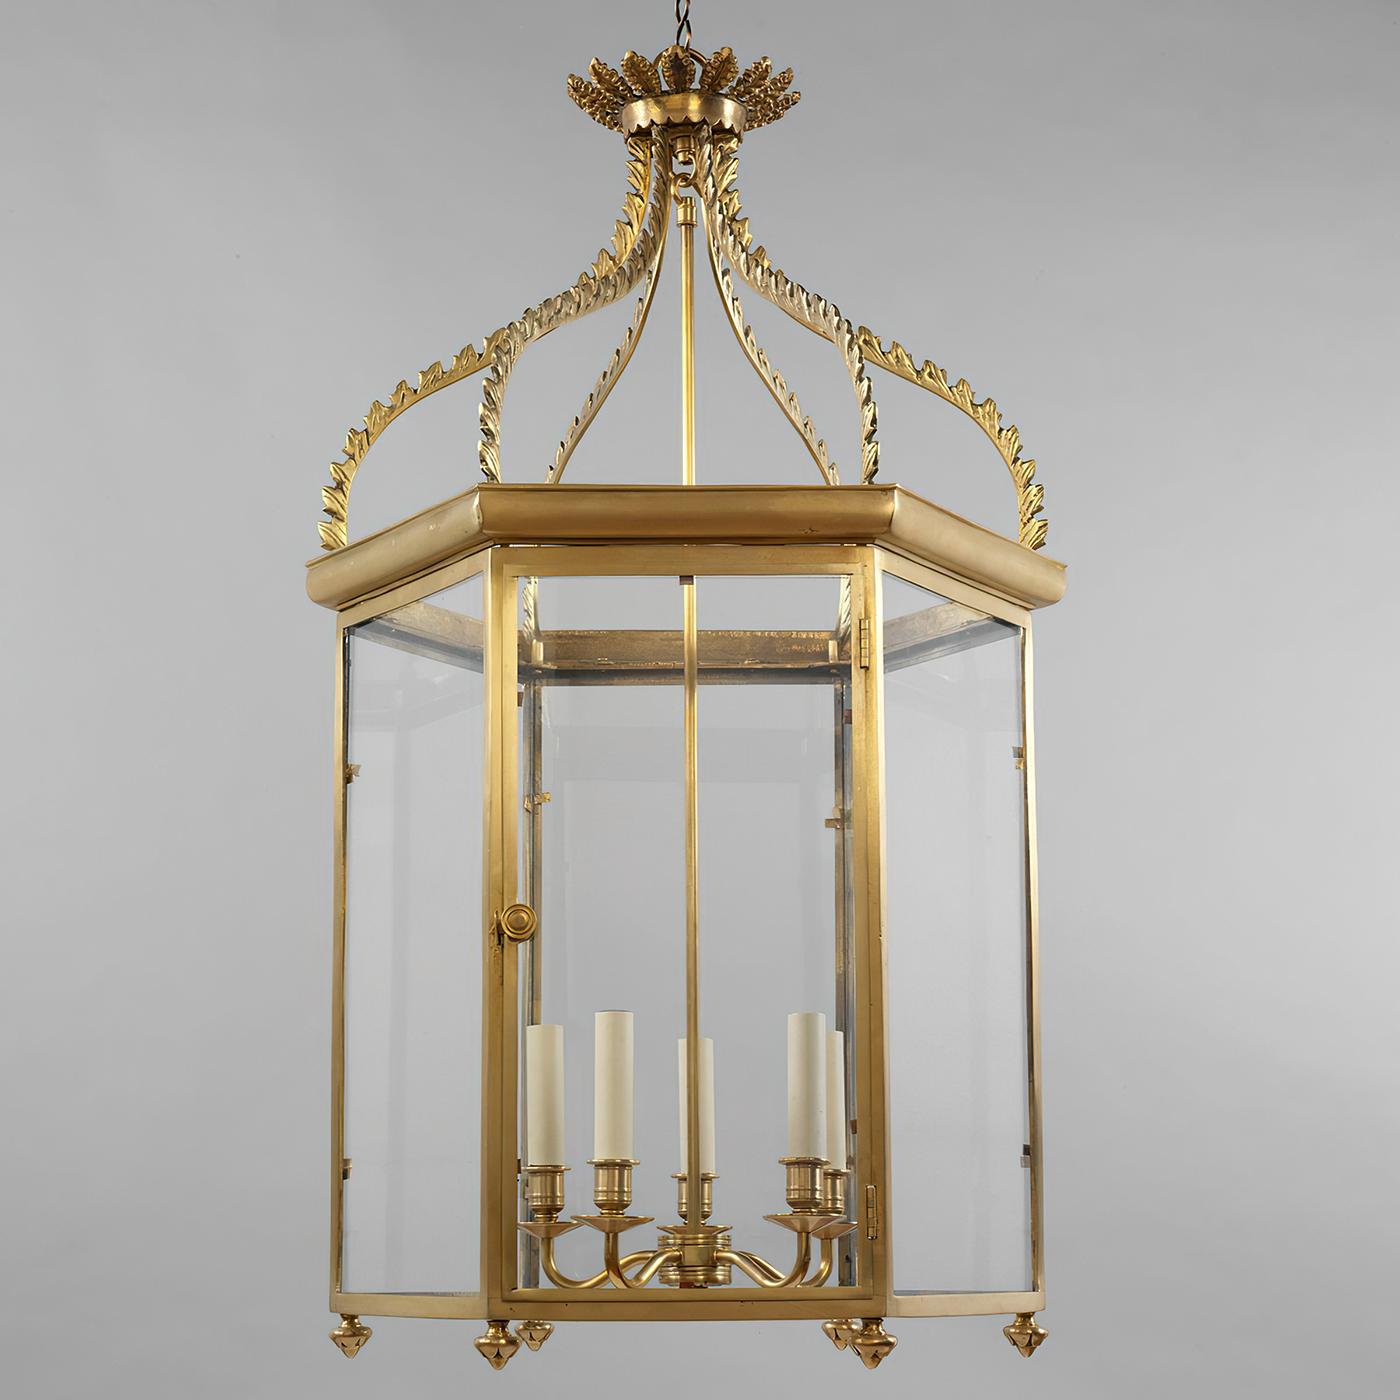 Regency hall lantern. This classic lantern is based on a 19th-century six-sided original. Superbly cast, it demonstrates a range of techniques, from the finely crafted frame to the ornately decorative upper section, finished with feathered detailing